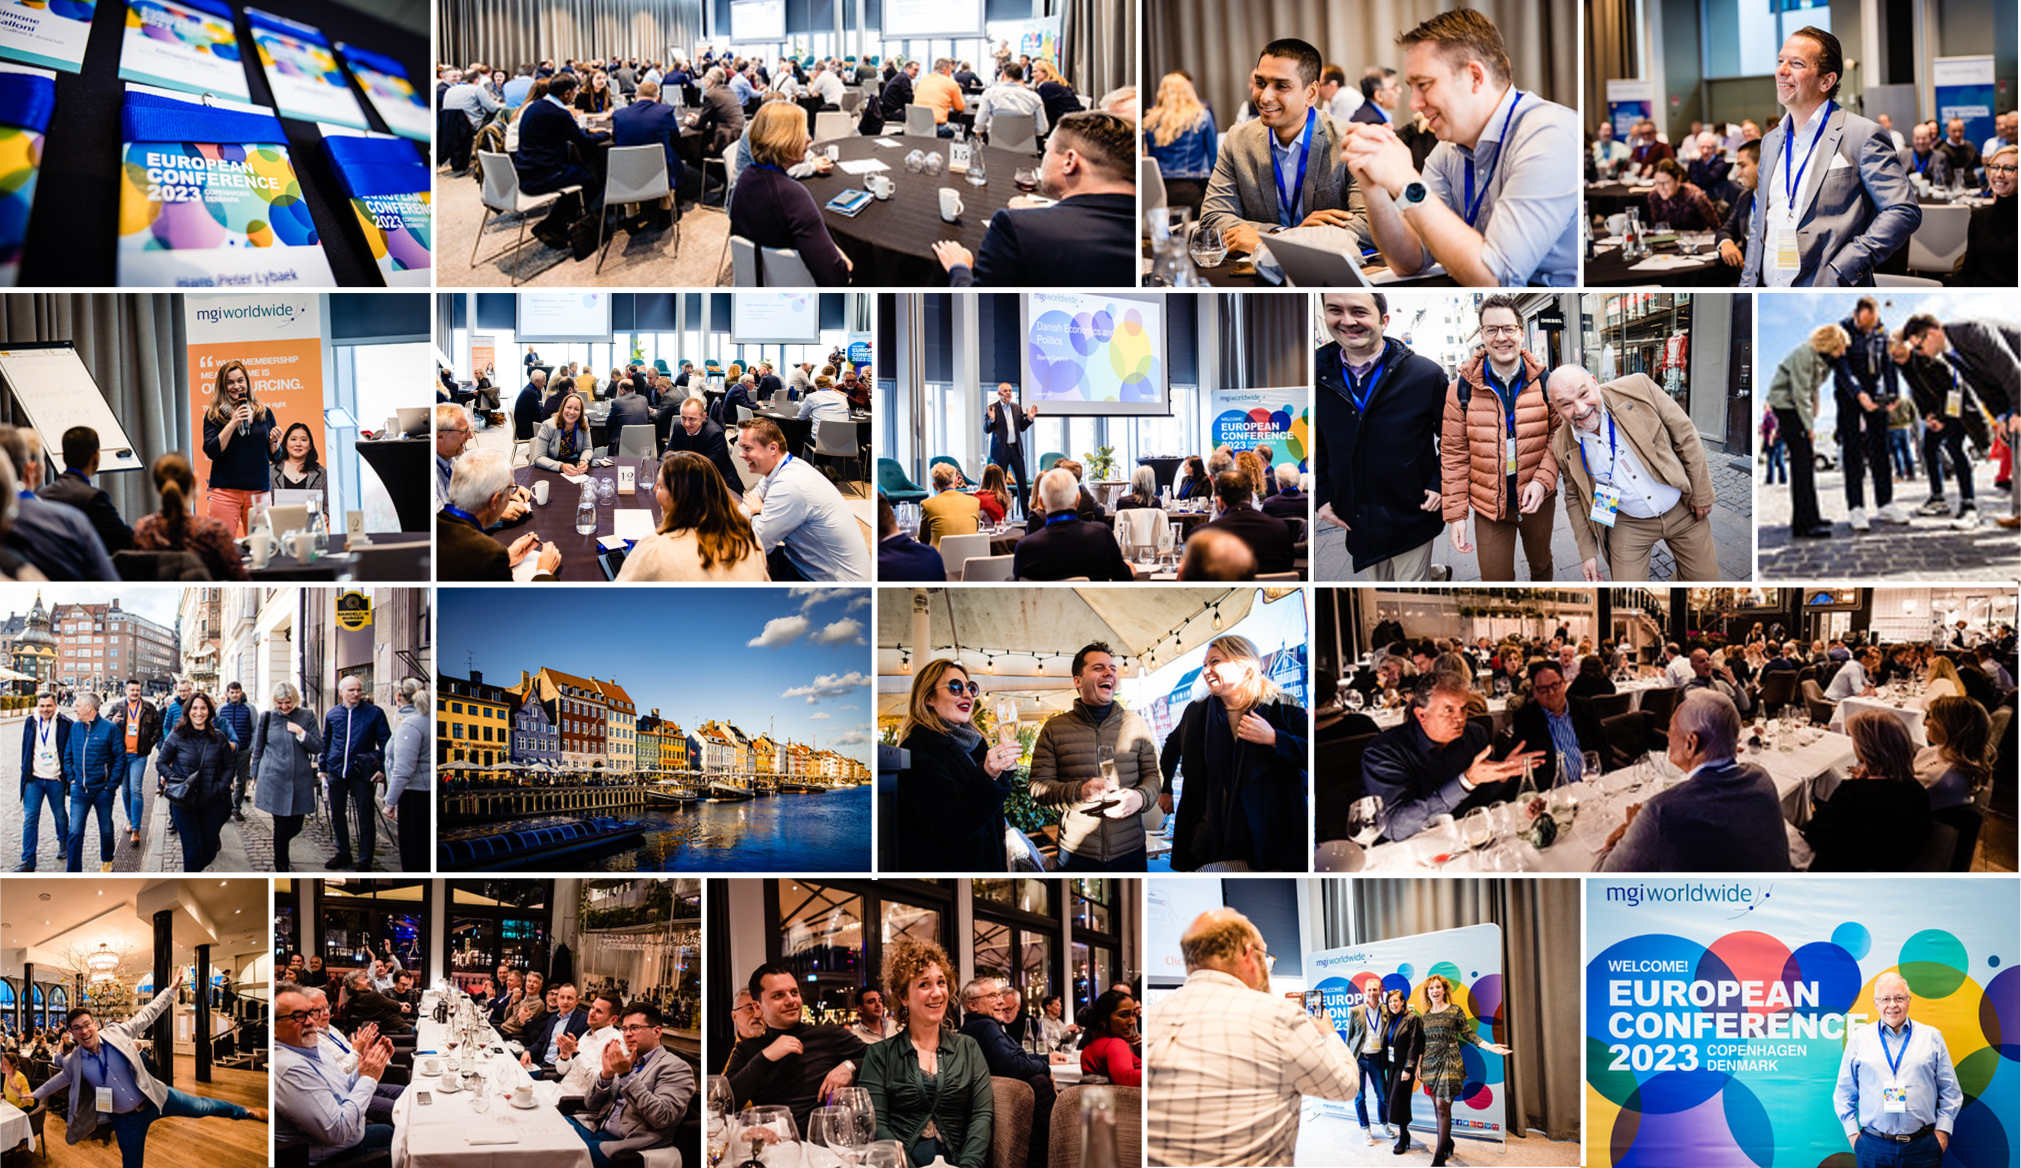 Montage of 18 pictures of delegates attending the European conference in Copenhagen